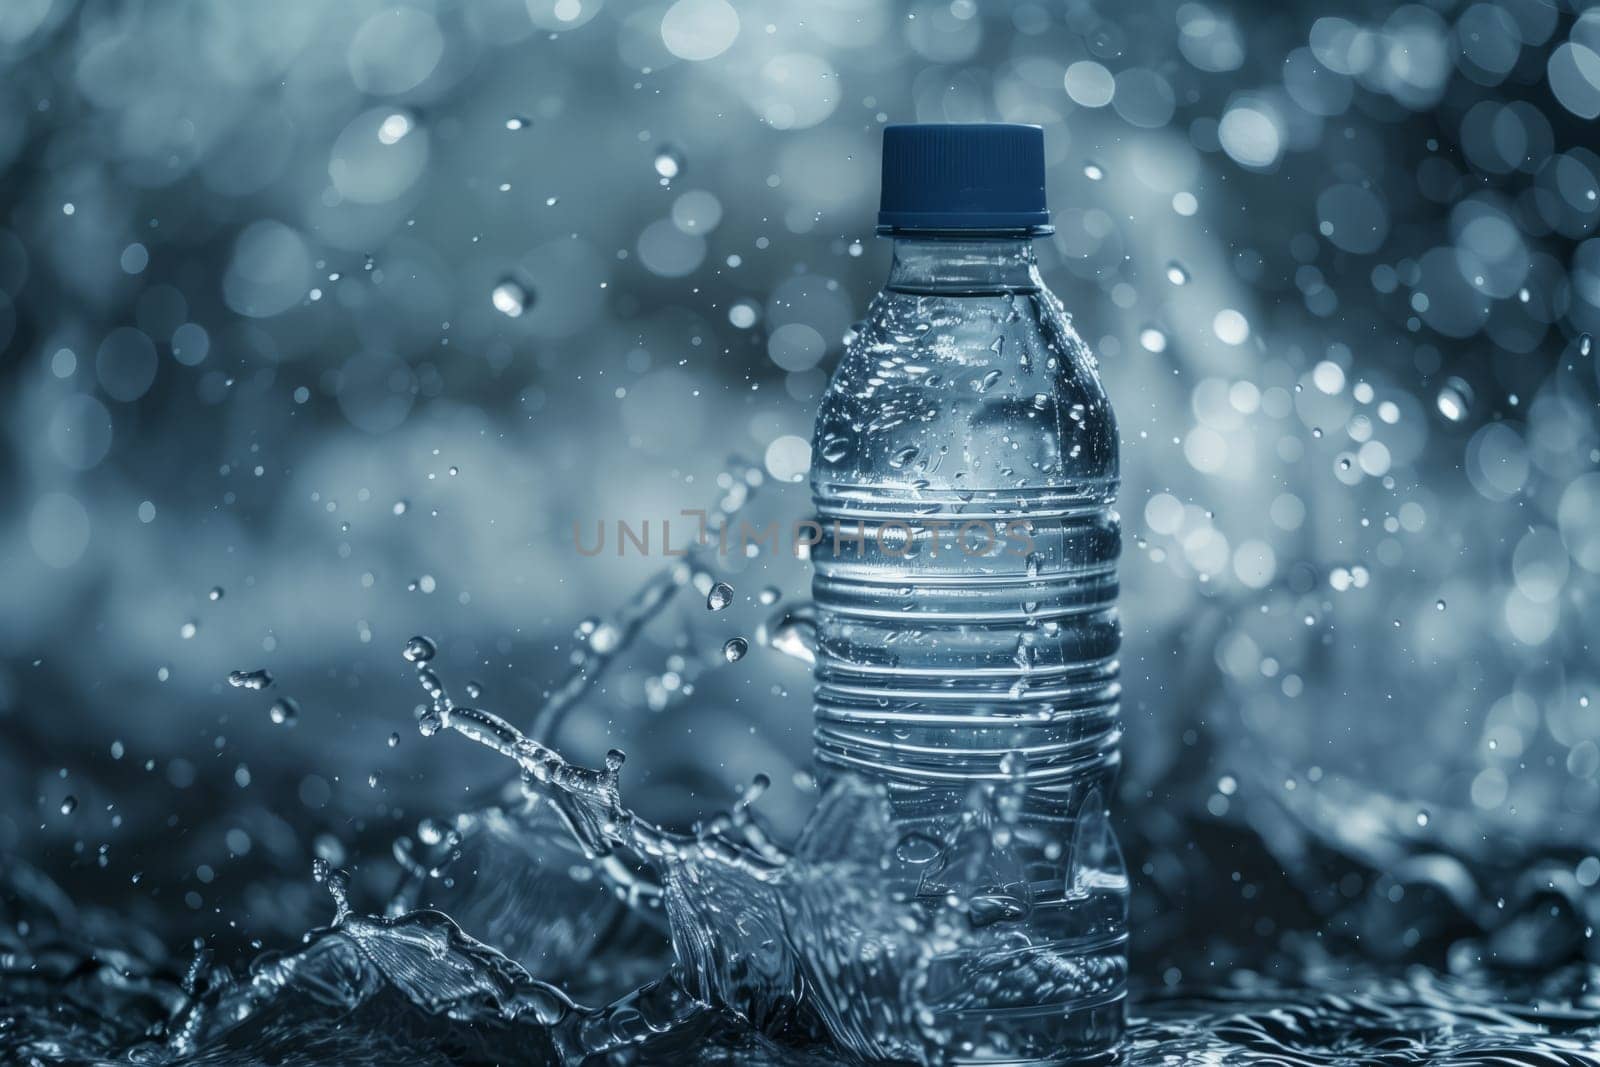 A plastic bottle filled with drinking water is spilling liquid onto the ground, creating a small splash